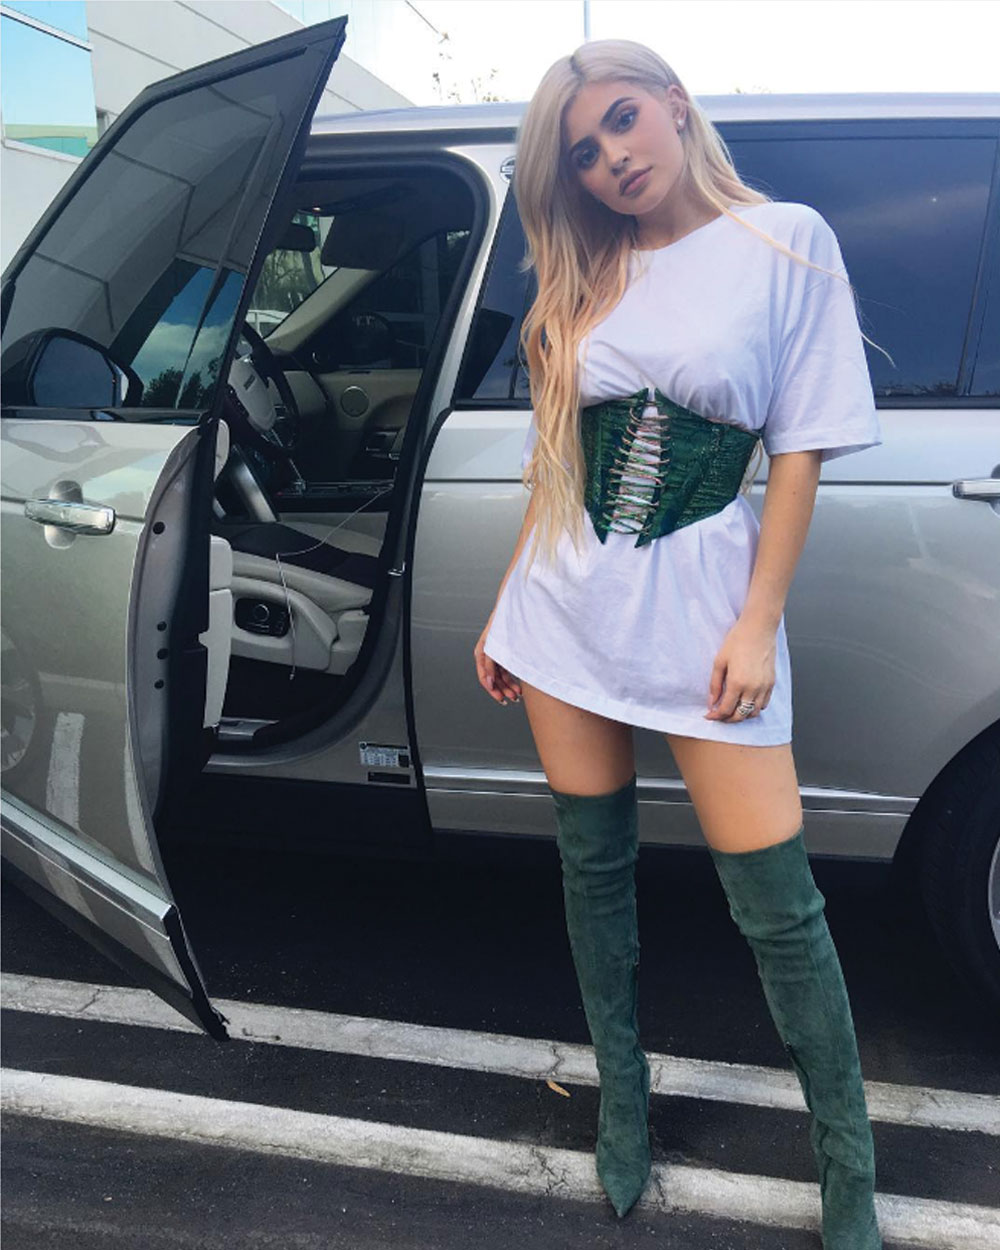 Kylie Jenner's dark green boots and corset combo is risqué but cute.